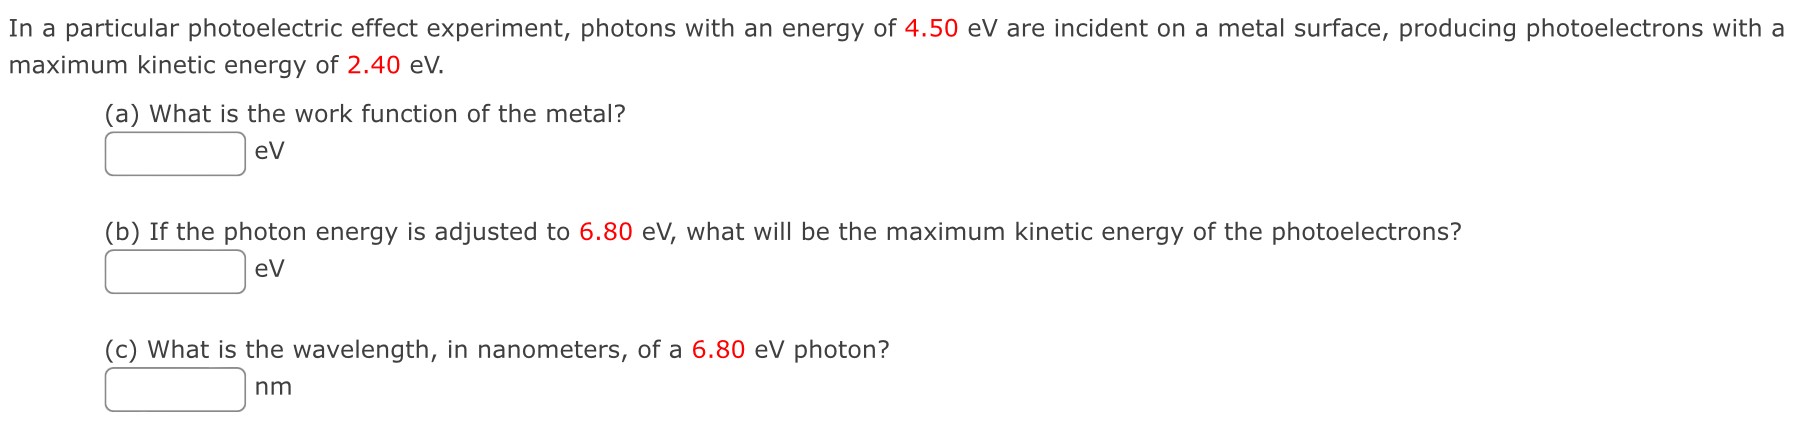 In a particular photoelectric effect experiment, photons with an energy of 4.50 eV are incident on a metal surface, producing photoelectrons with a maximum kinetic energy of 2.40 eV. (a) What is the work function of the metal? eV (b) If the photon energy is adjusted to 6.80 eV, what will be the maximum kinetic energy of the photoelectrons? eV (c) What is the wavelength, in nanometers, of a 6.80 eV photon? nm